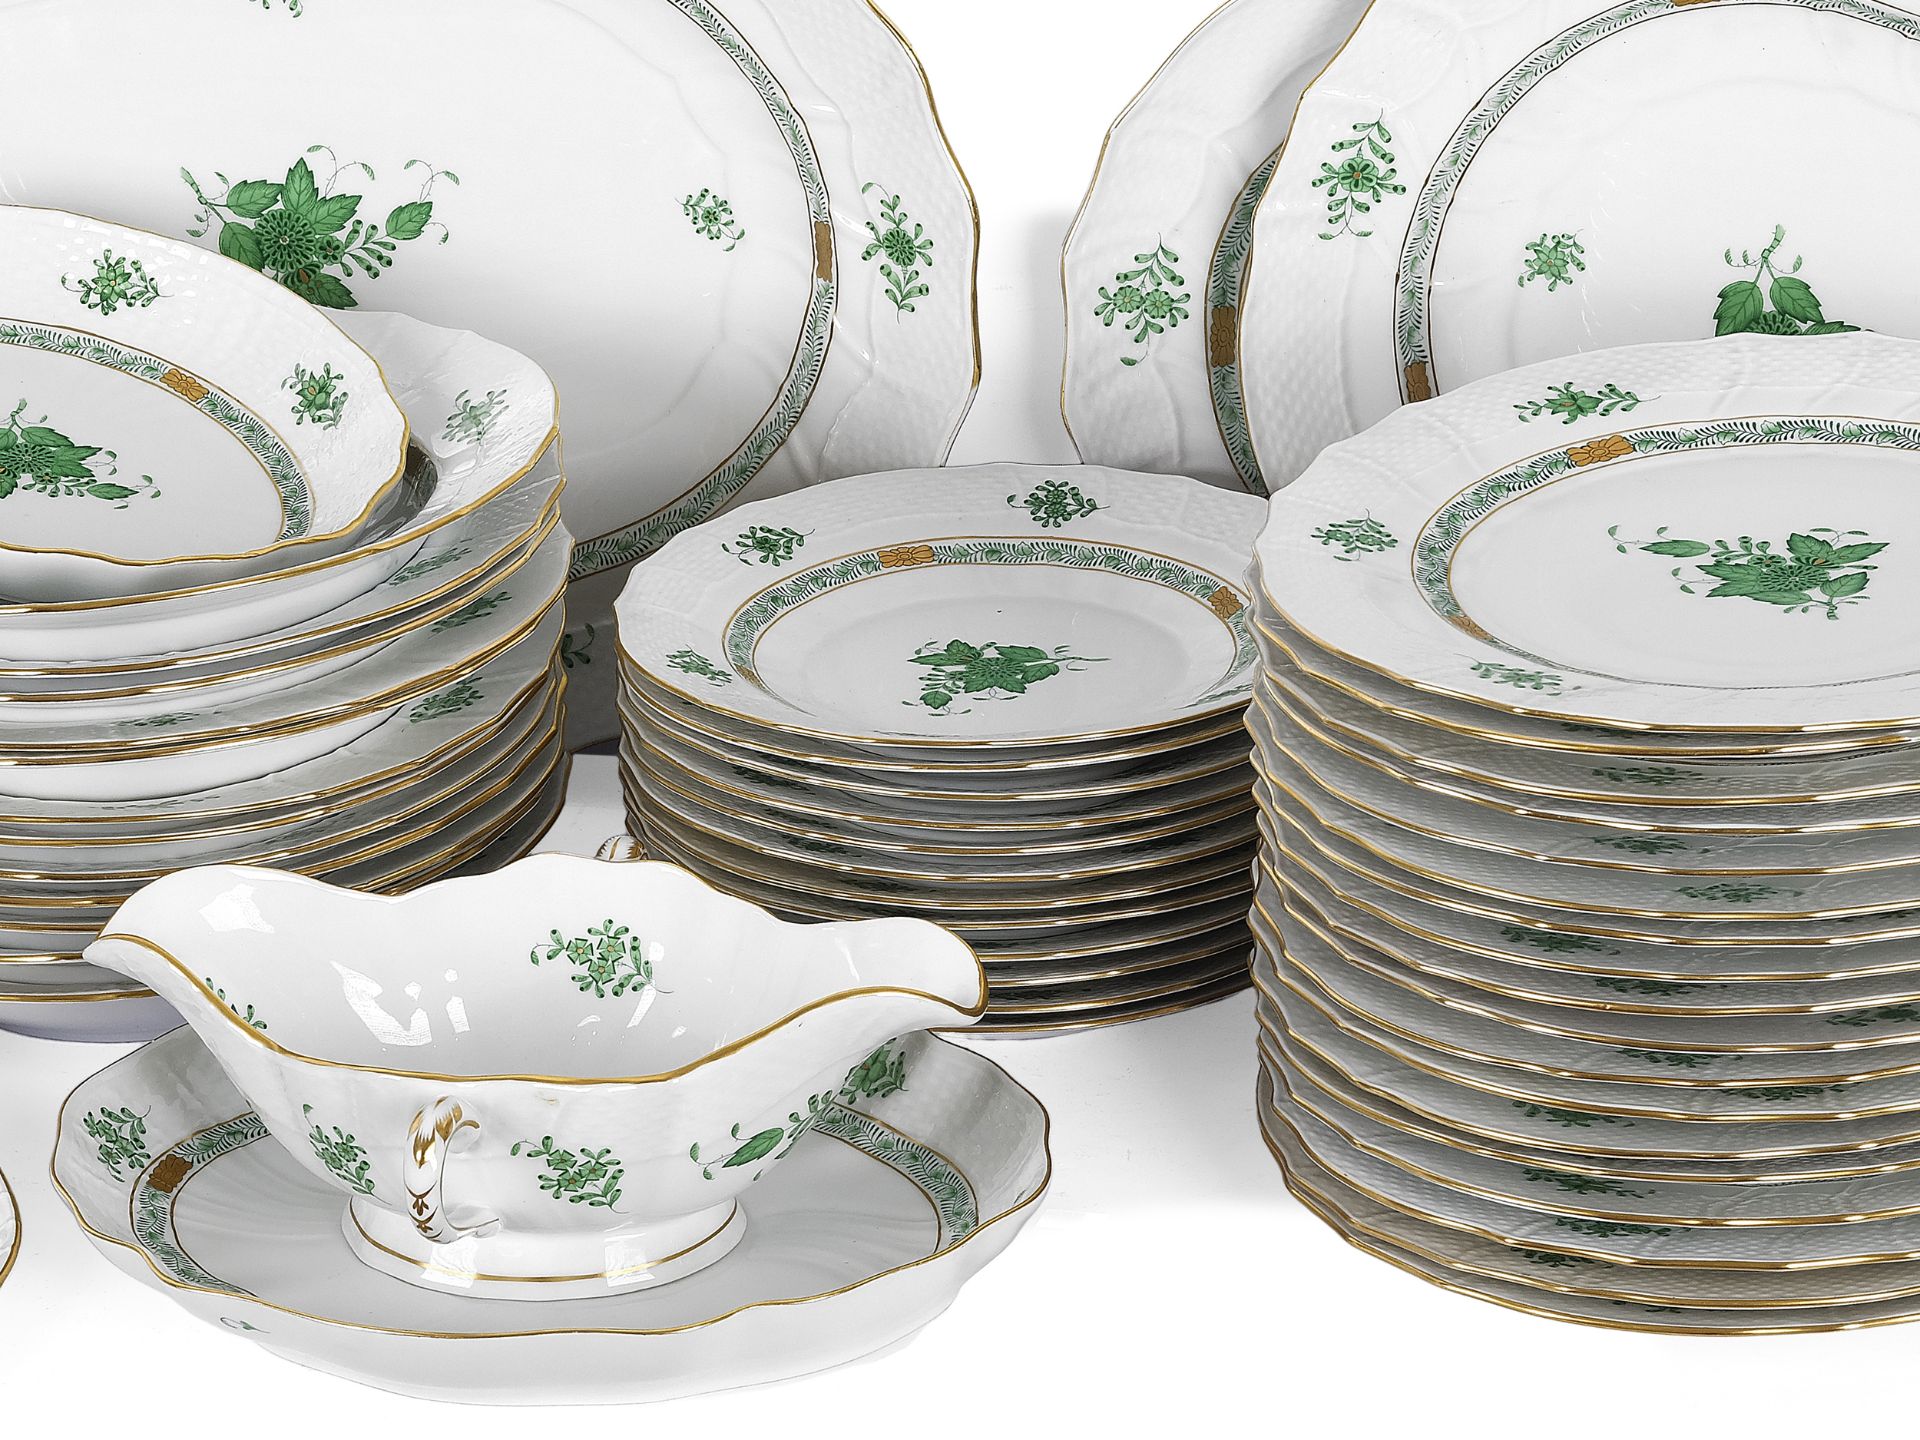 Large dinner service, 53 piece, Herend, Apponyi Vert - Image 3 of 6